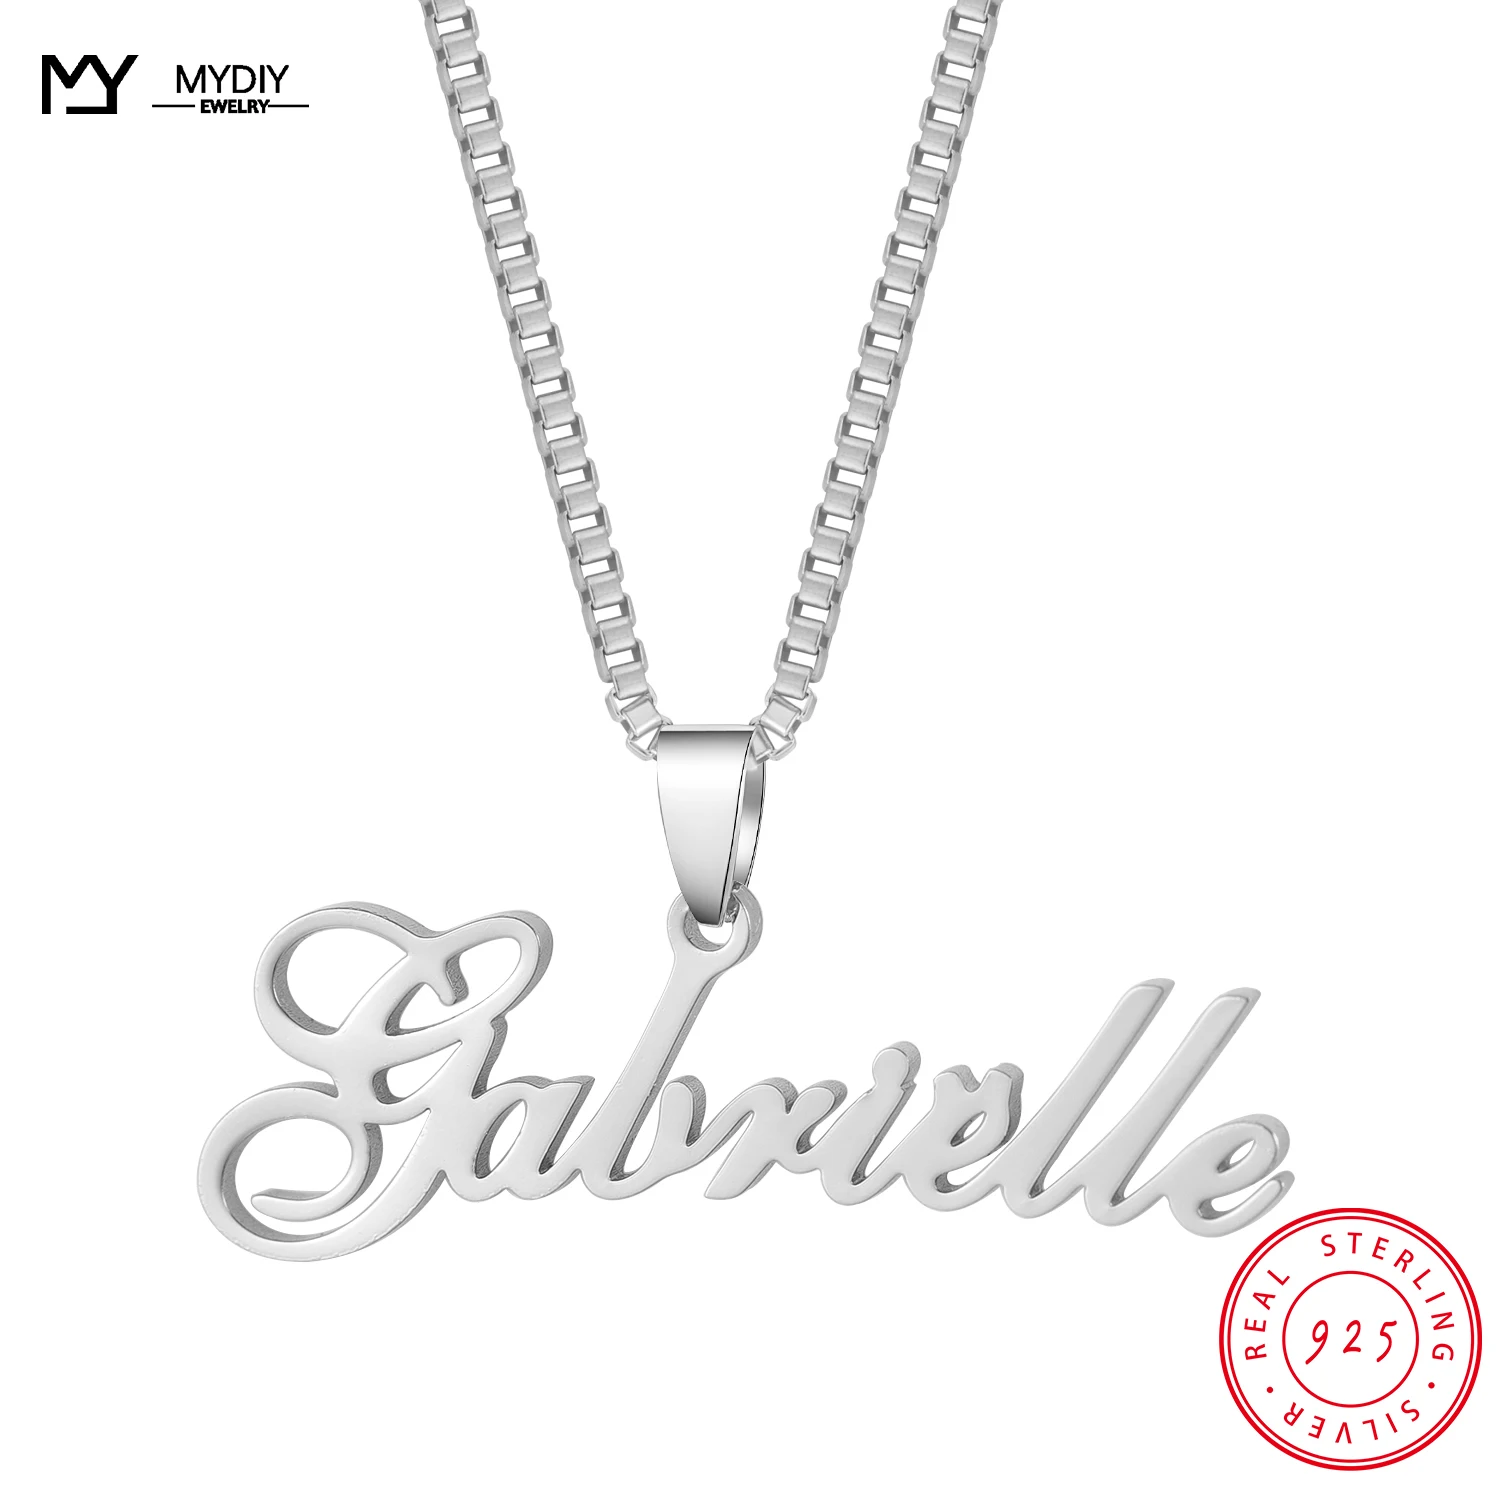 MYDIY 925 Sterling Silver Customized Name Necklace For Girlfriend, Family Gift Exquisite Pendant Jewelry 2021 Trend